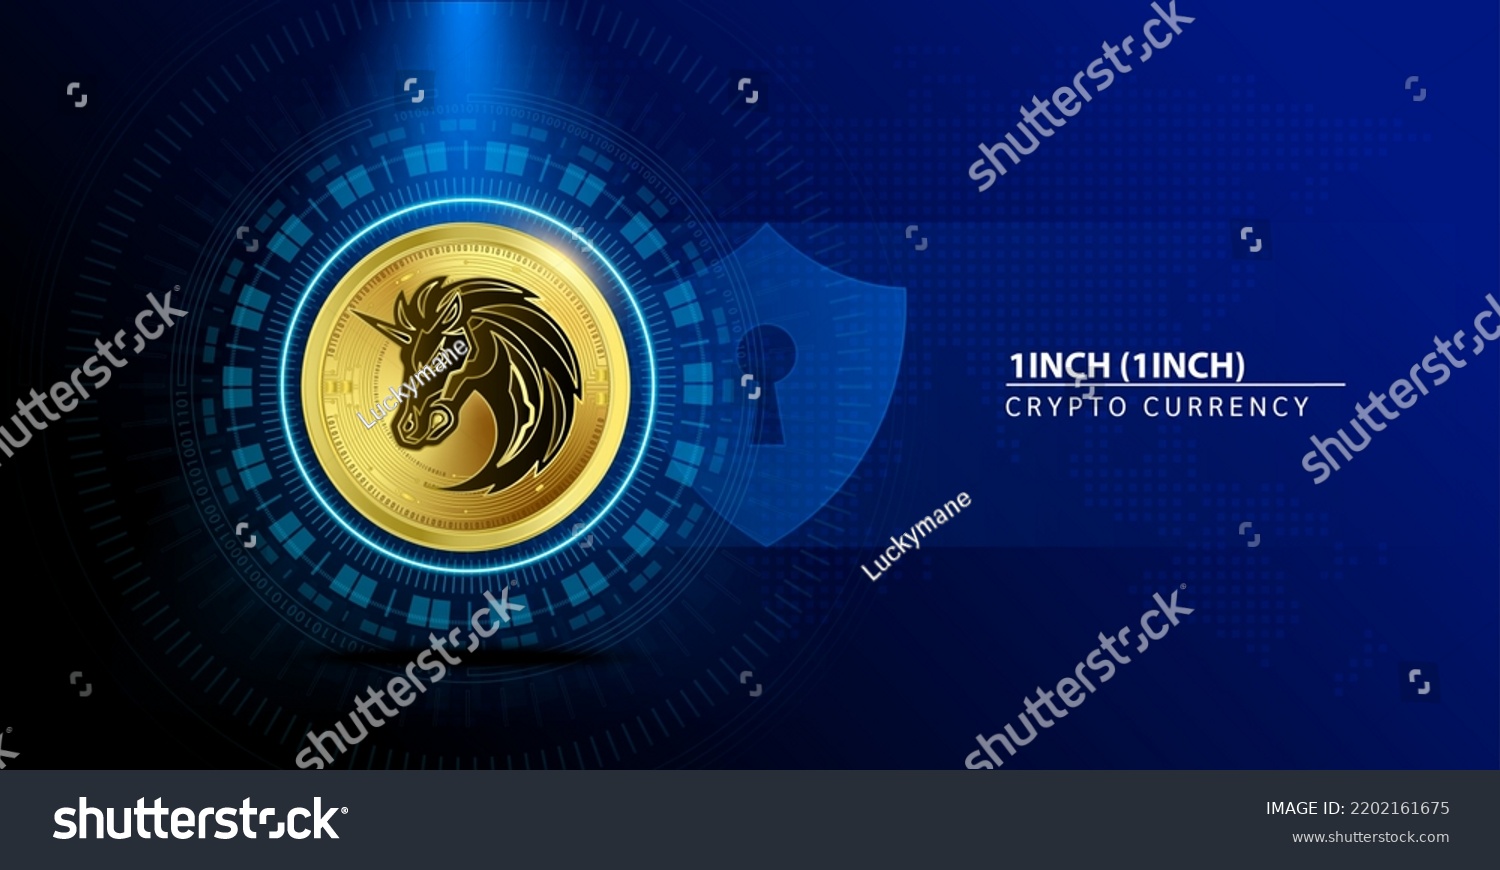 SVG of 1inch (1INCH) coin gold. Cryptocurrency blockchain. Future digital (crypto currency) currency replacement technology concept. On blue background. 3D Vector illustration. svg